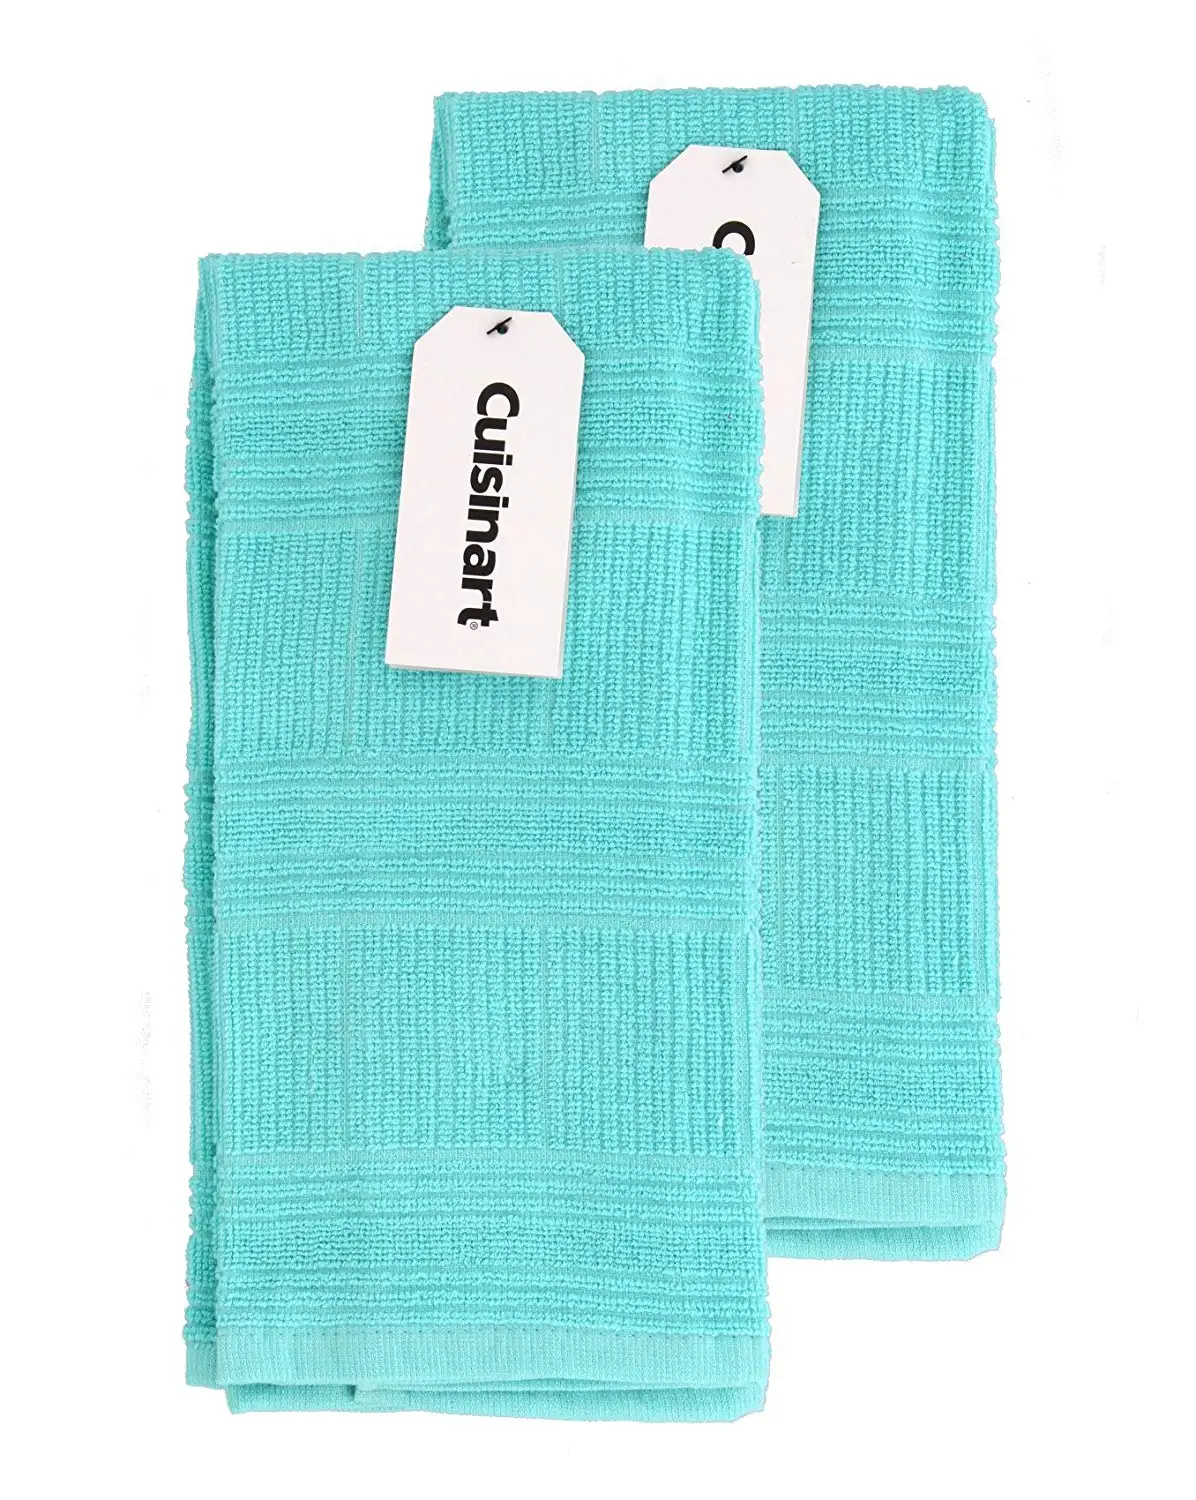 teal hand towels